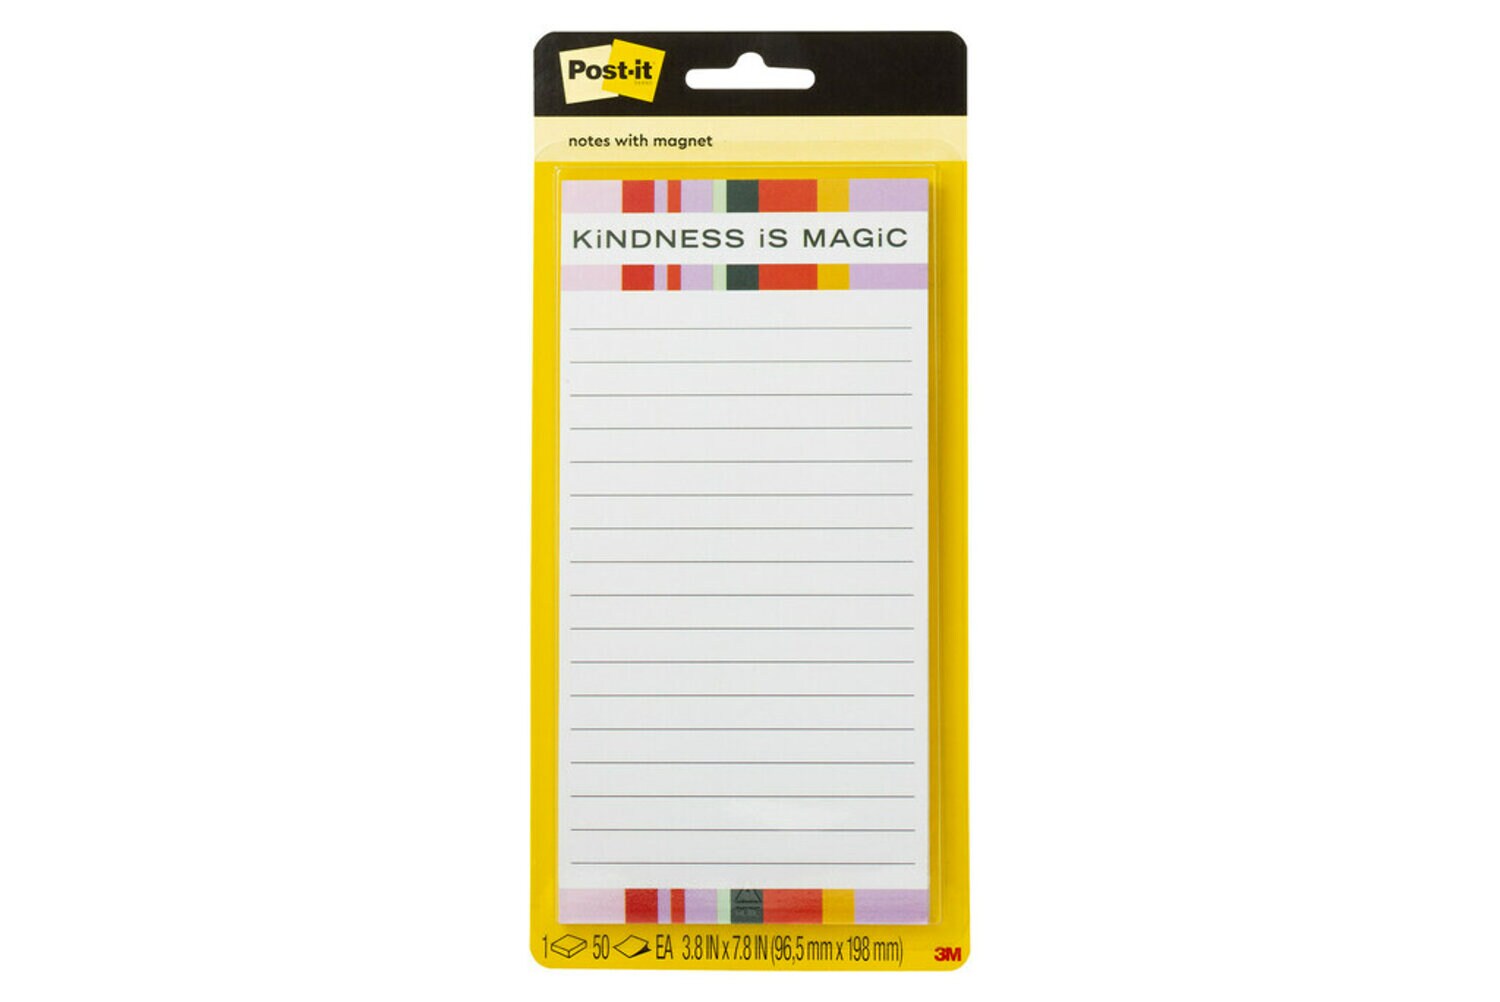 7100241134 - Post-it Notes LIST-KIND, 3.8 in x 7.8 in (96.5 mm x 198 mm)